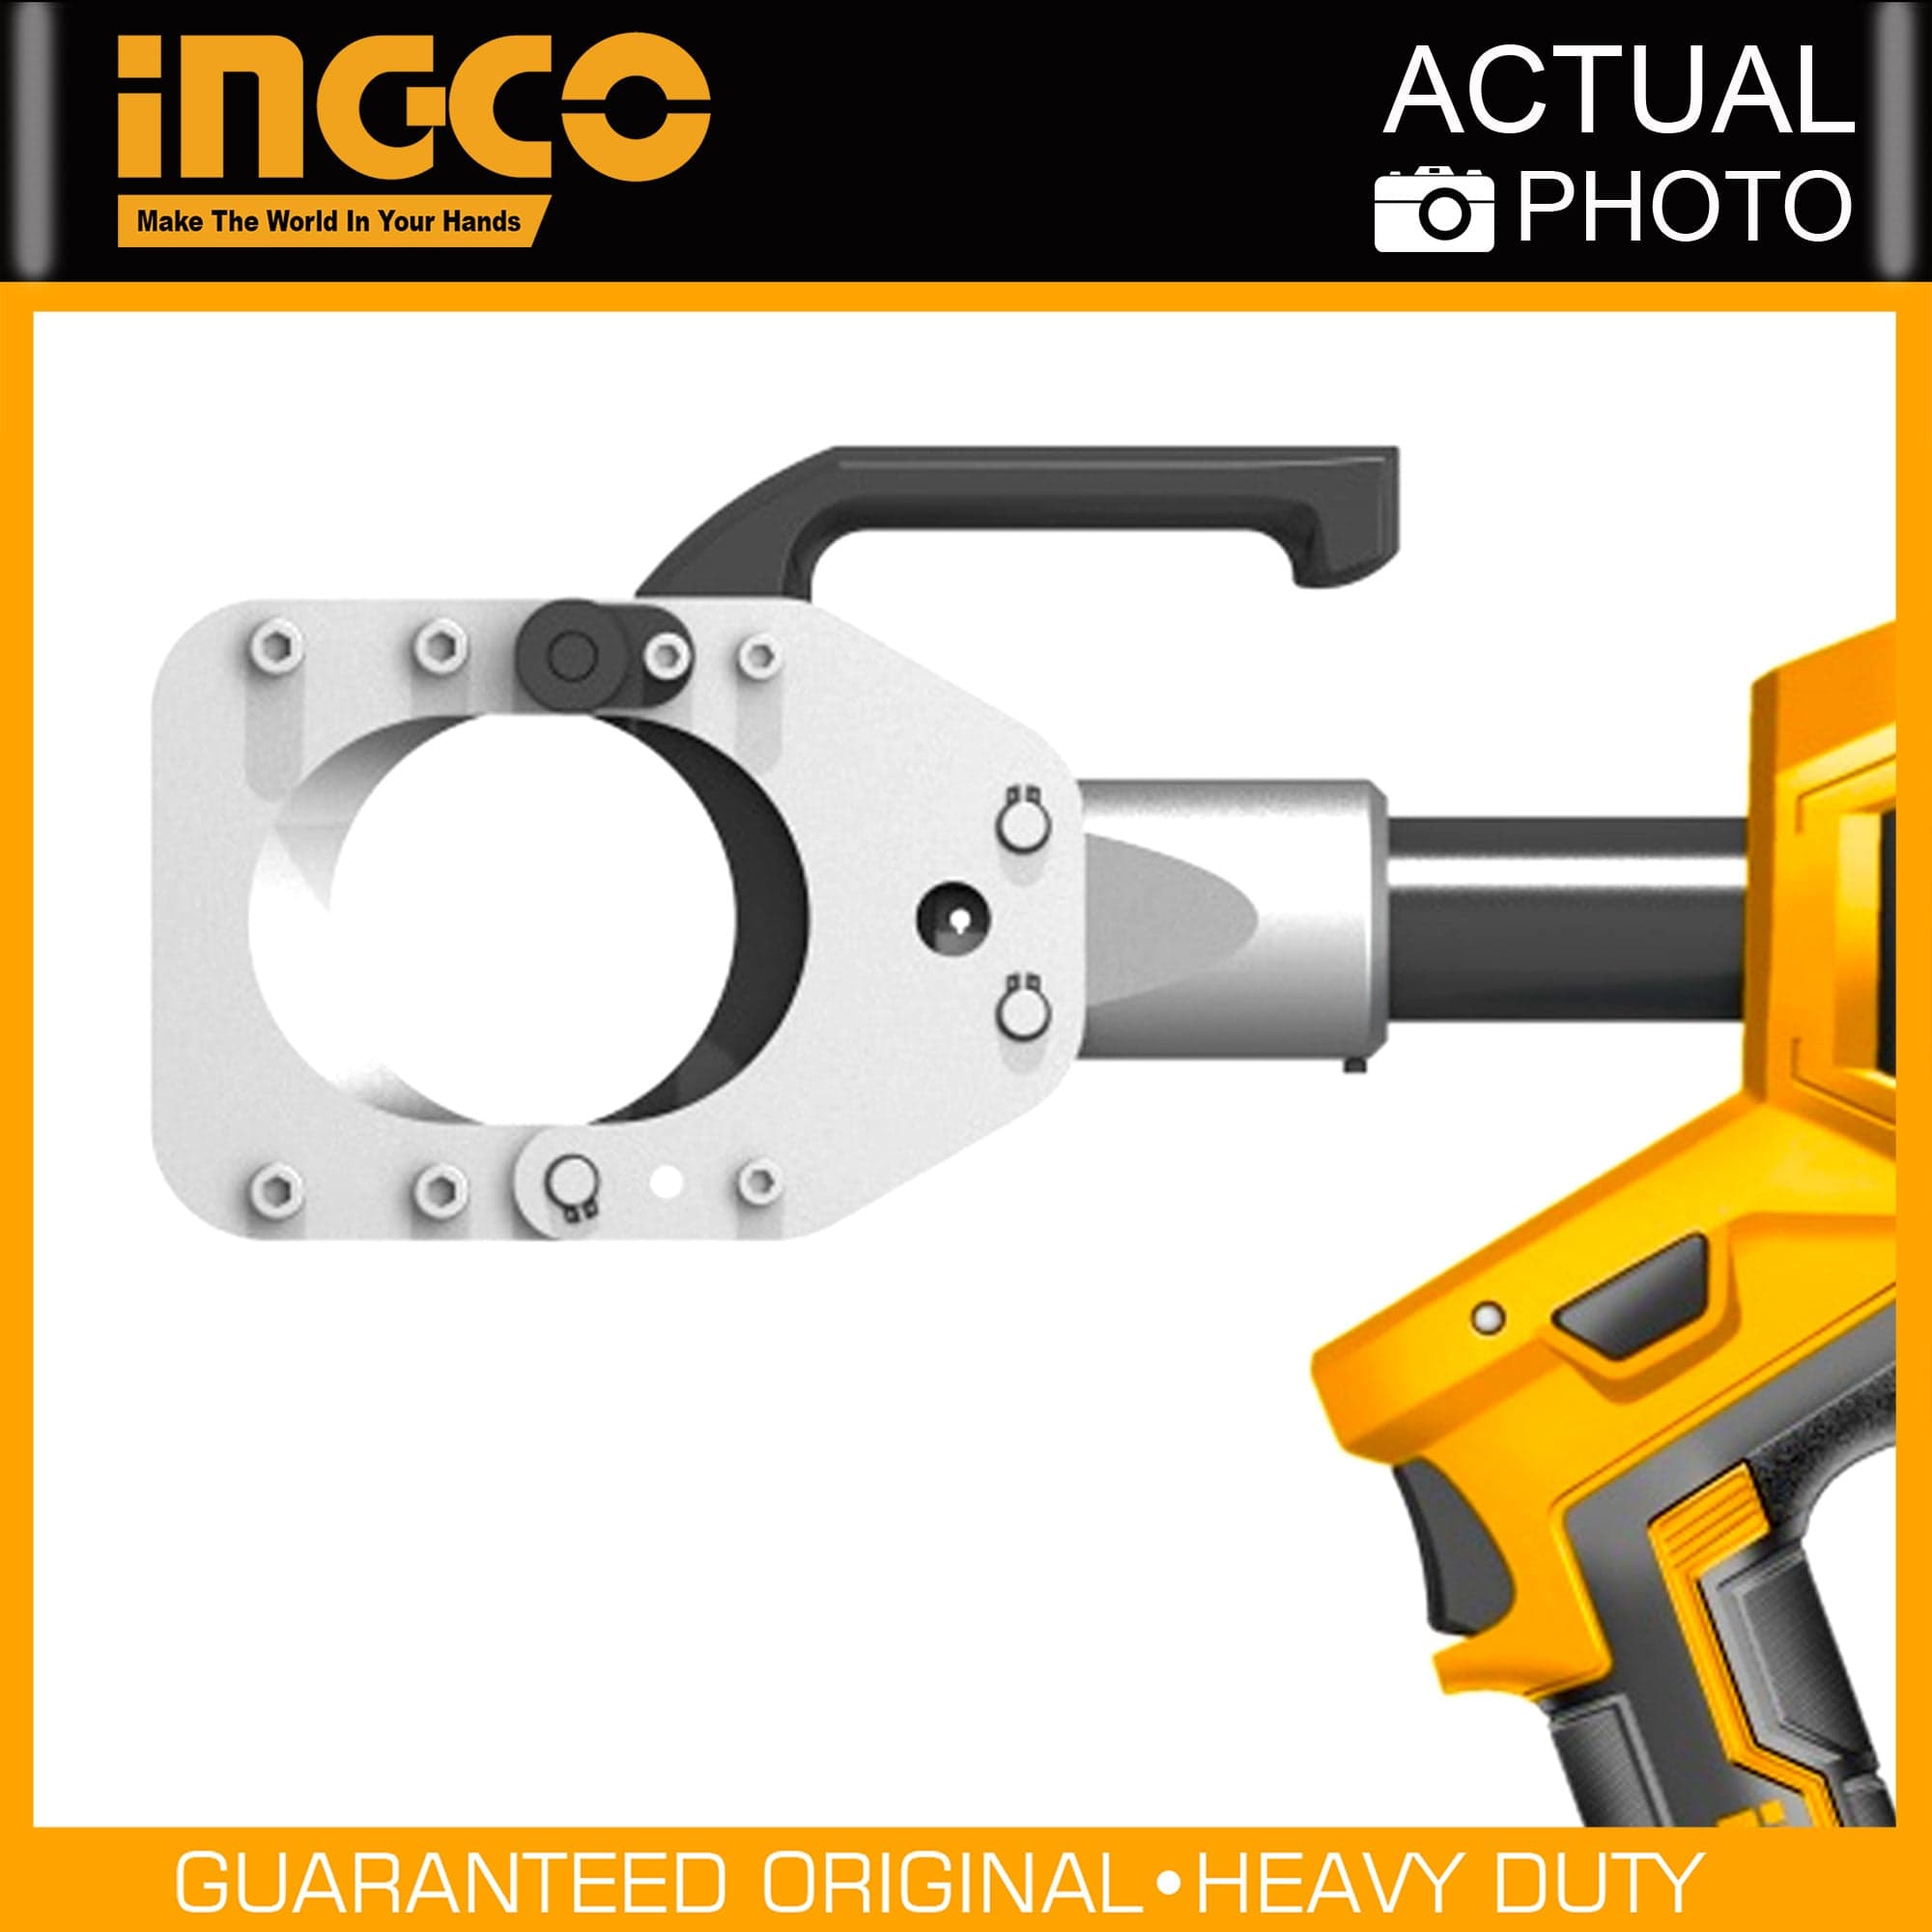 Ingco Hydraulic Cable Cutter 20V - CRCLI2002 | Buy Online in Accra, Ghana - Supply Master Specialty Power Tool Buy Tools hardware Building materials